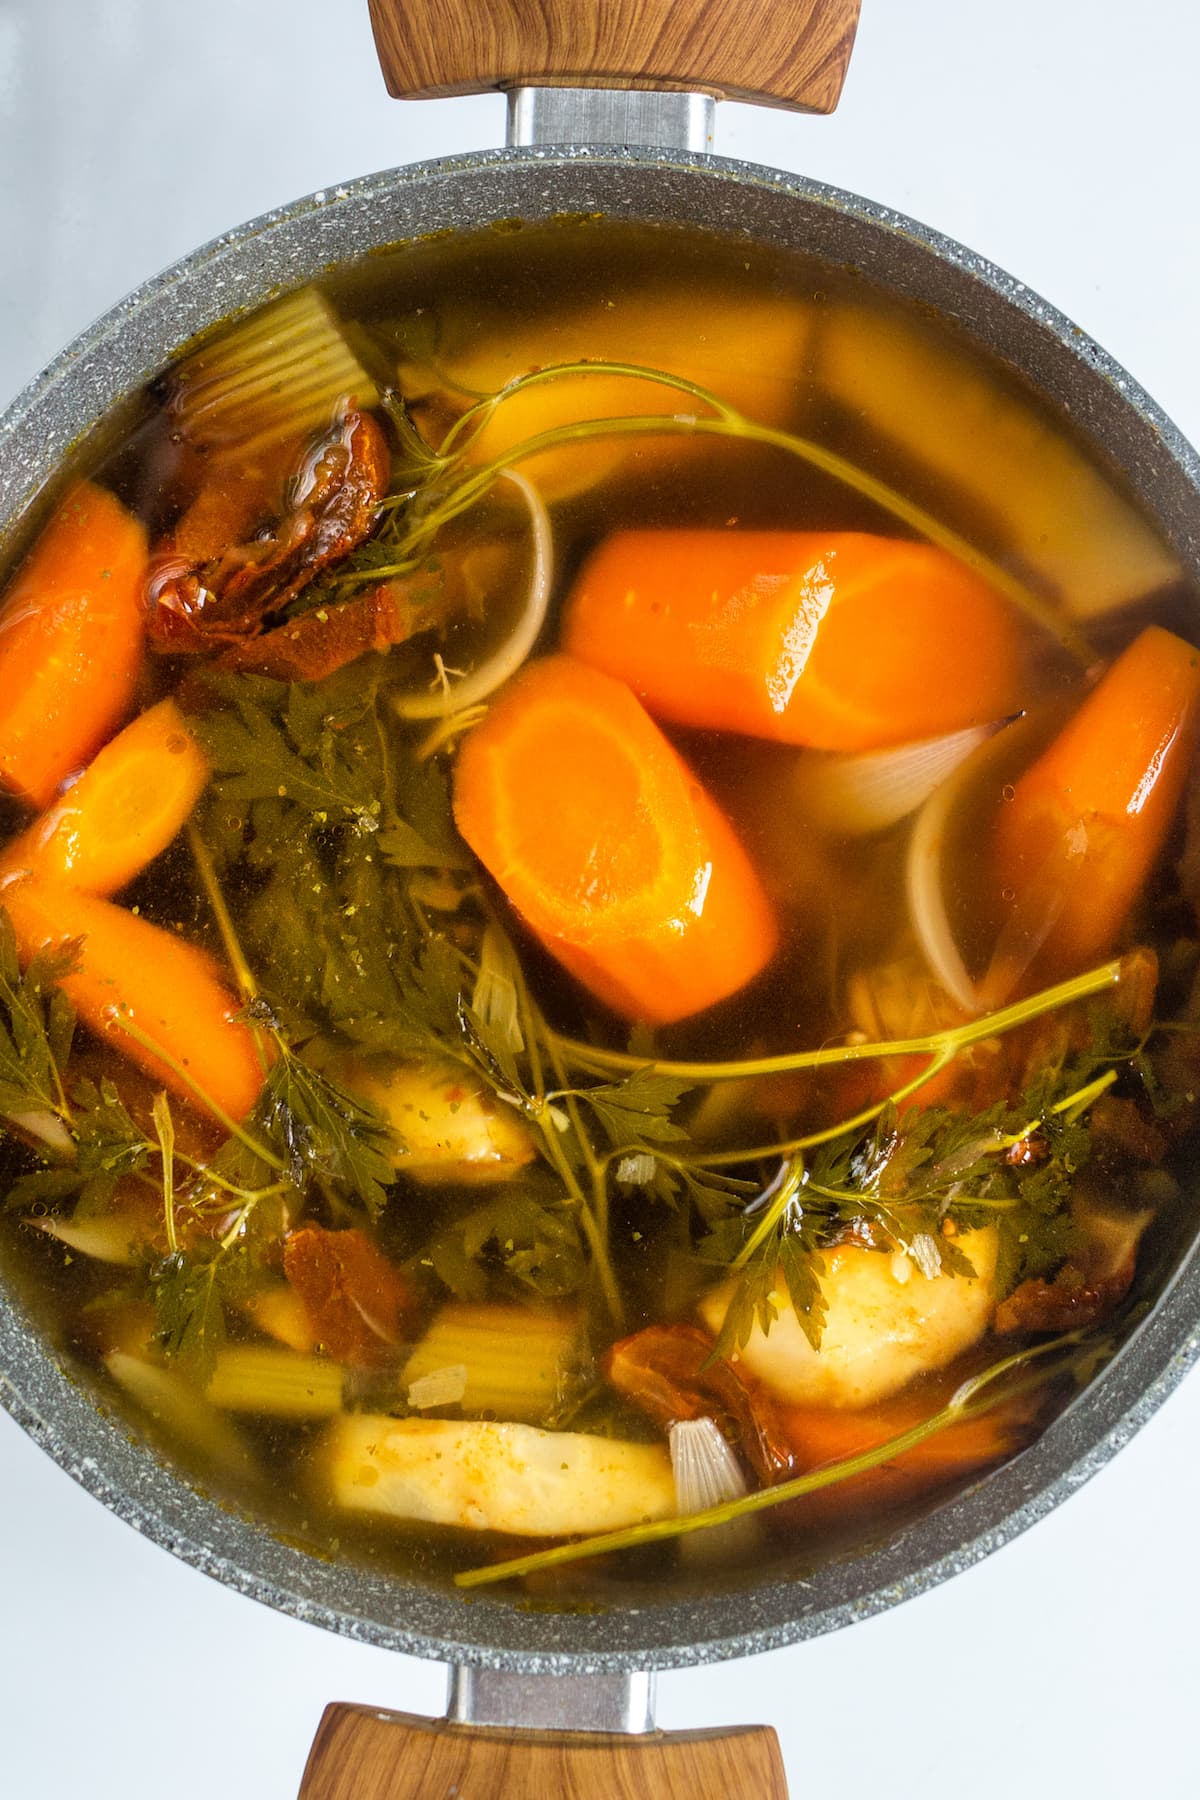 Top view of boiled vegetables for a vegetable broth.